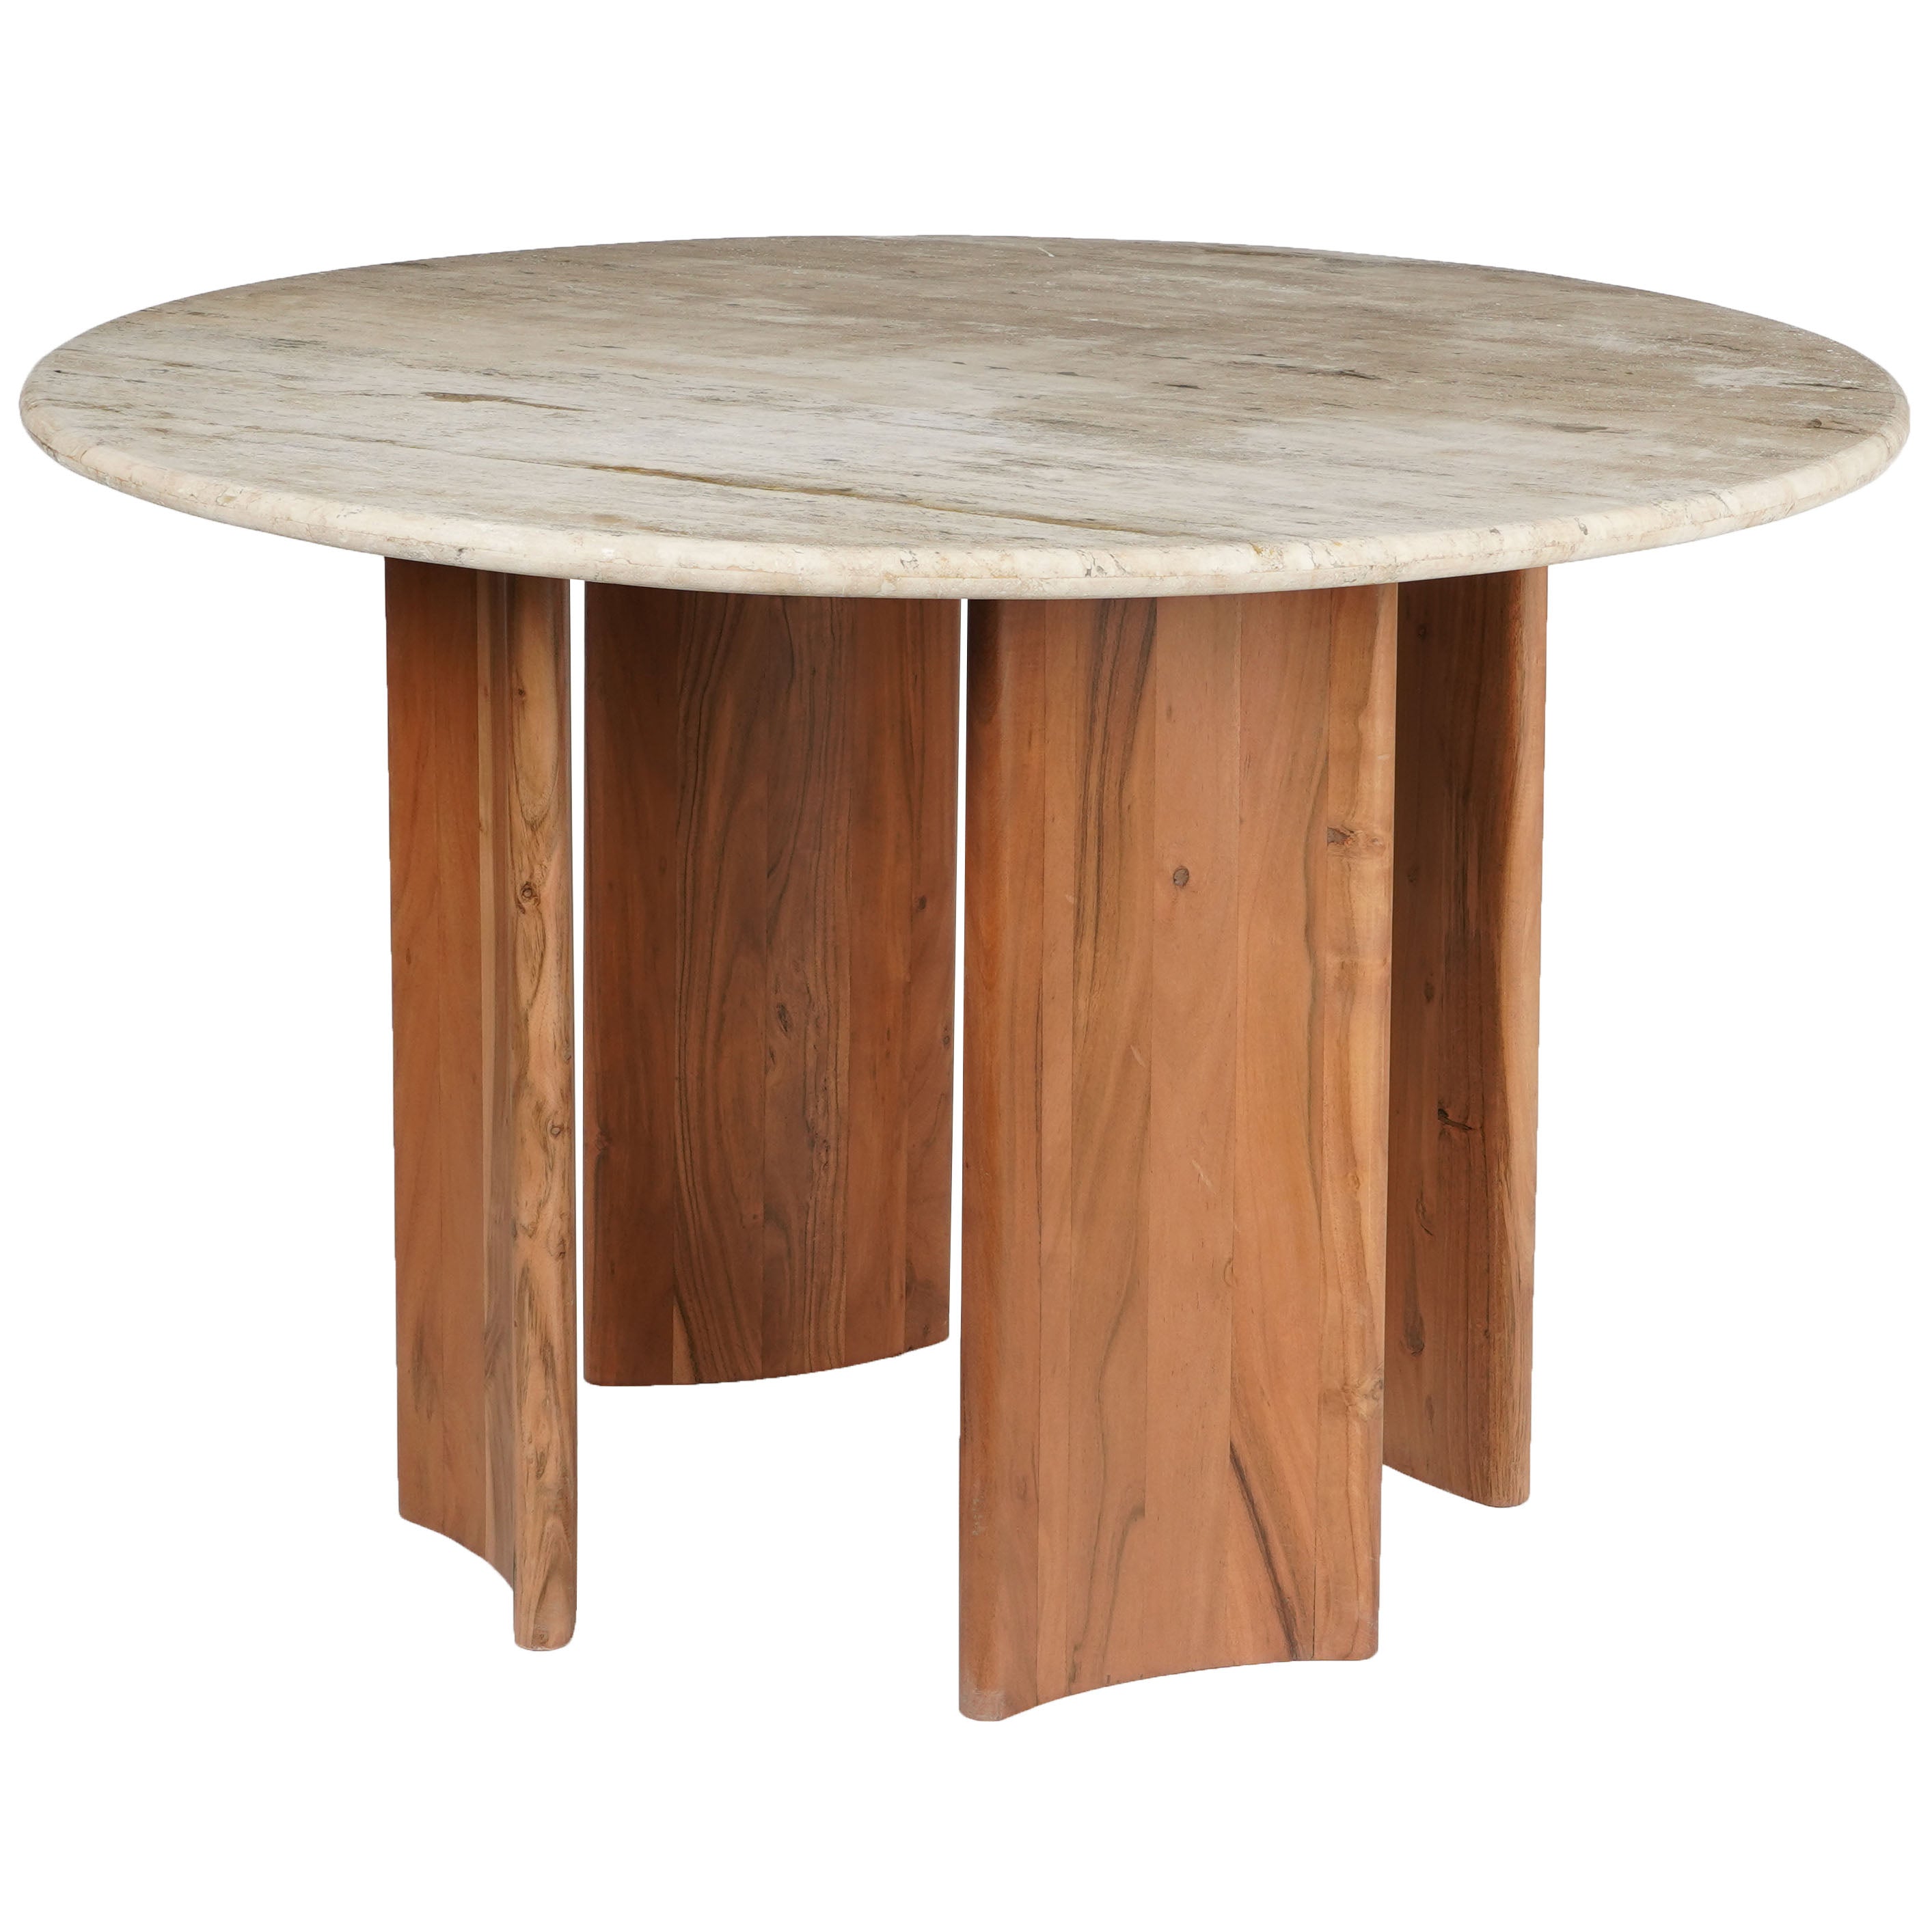 Safavieh Couture Trinsly Travertine Top Dining Table, SFV5752